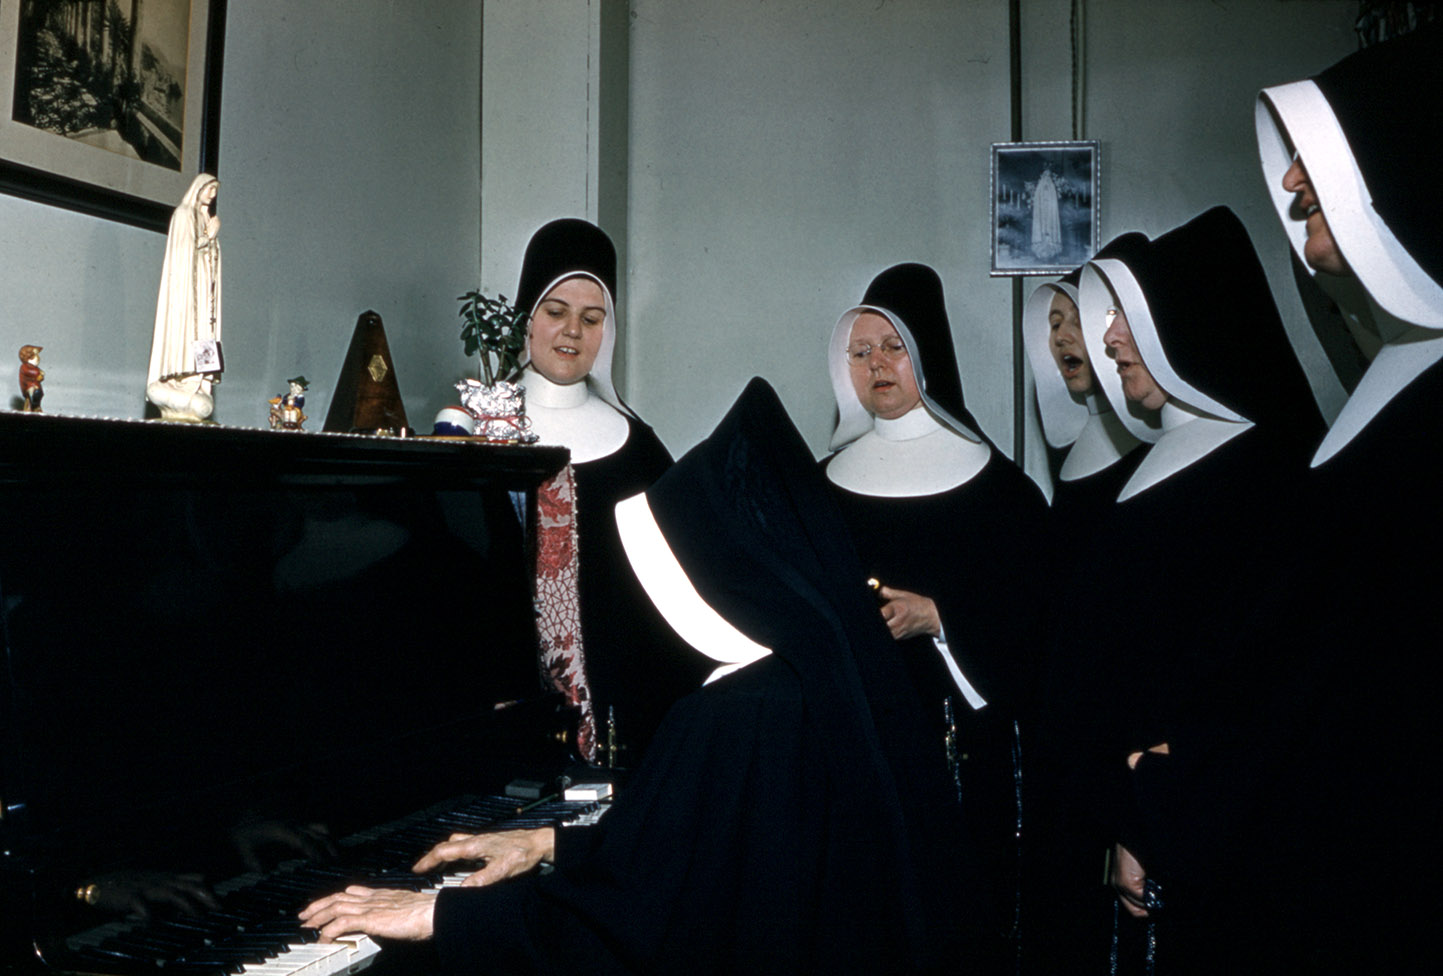 communityalbums - Sisters of Charity-Halifax singing around the piano, Mount Carmel Convent, New Waterford, Nova Scotia.